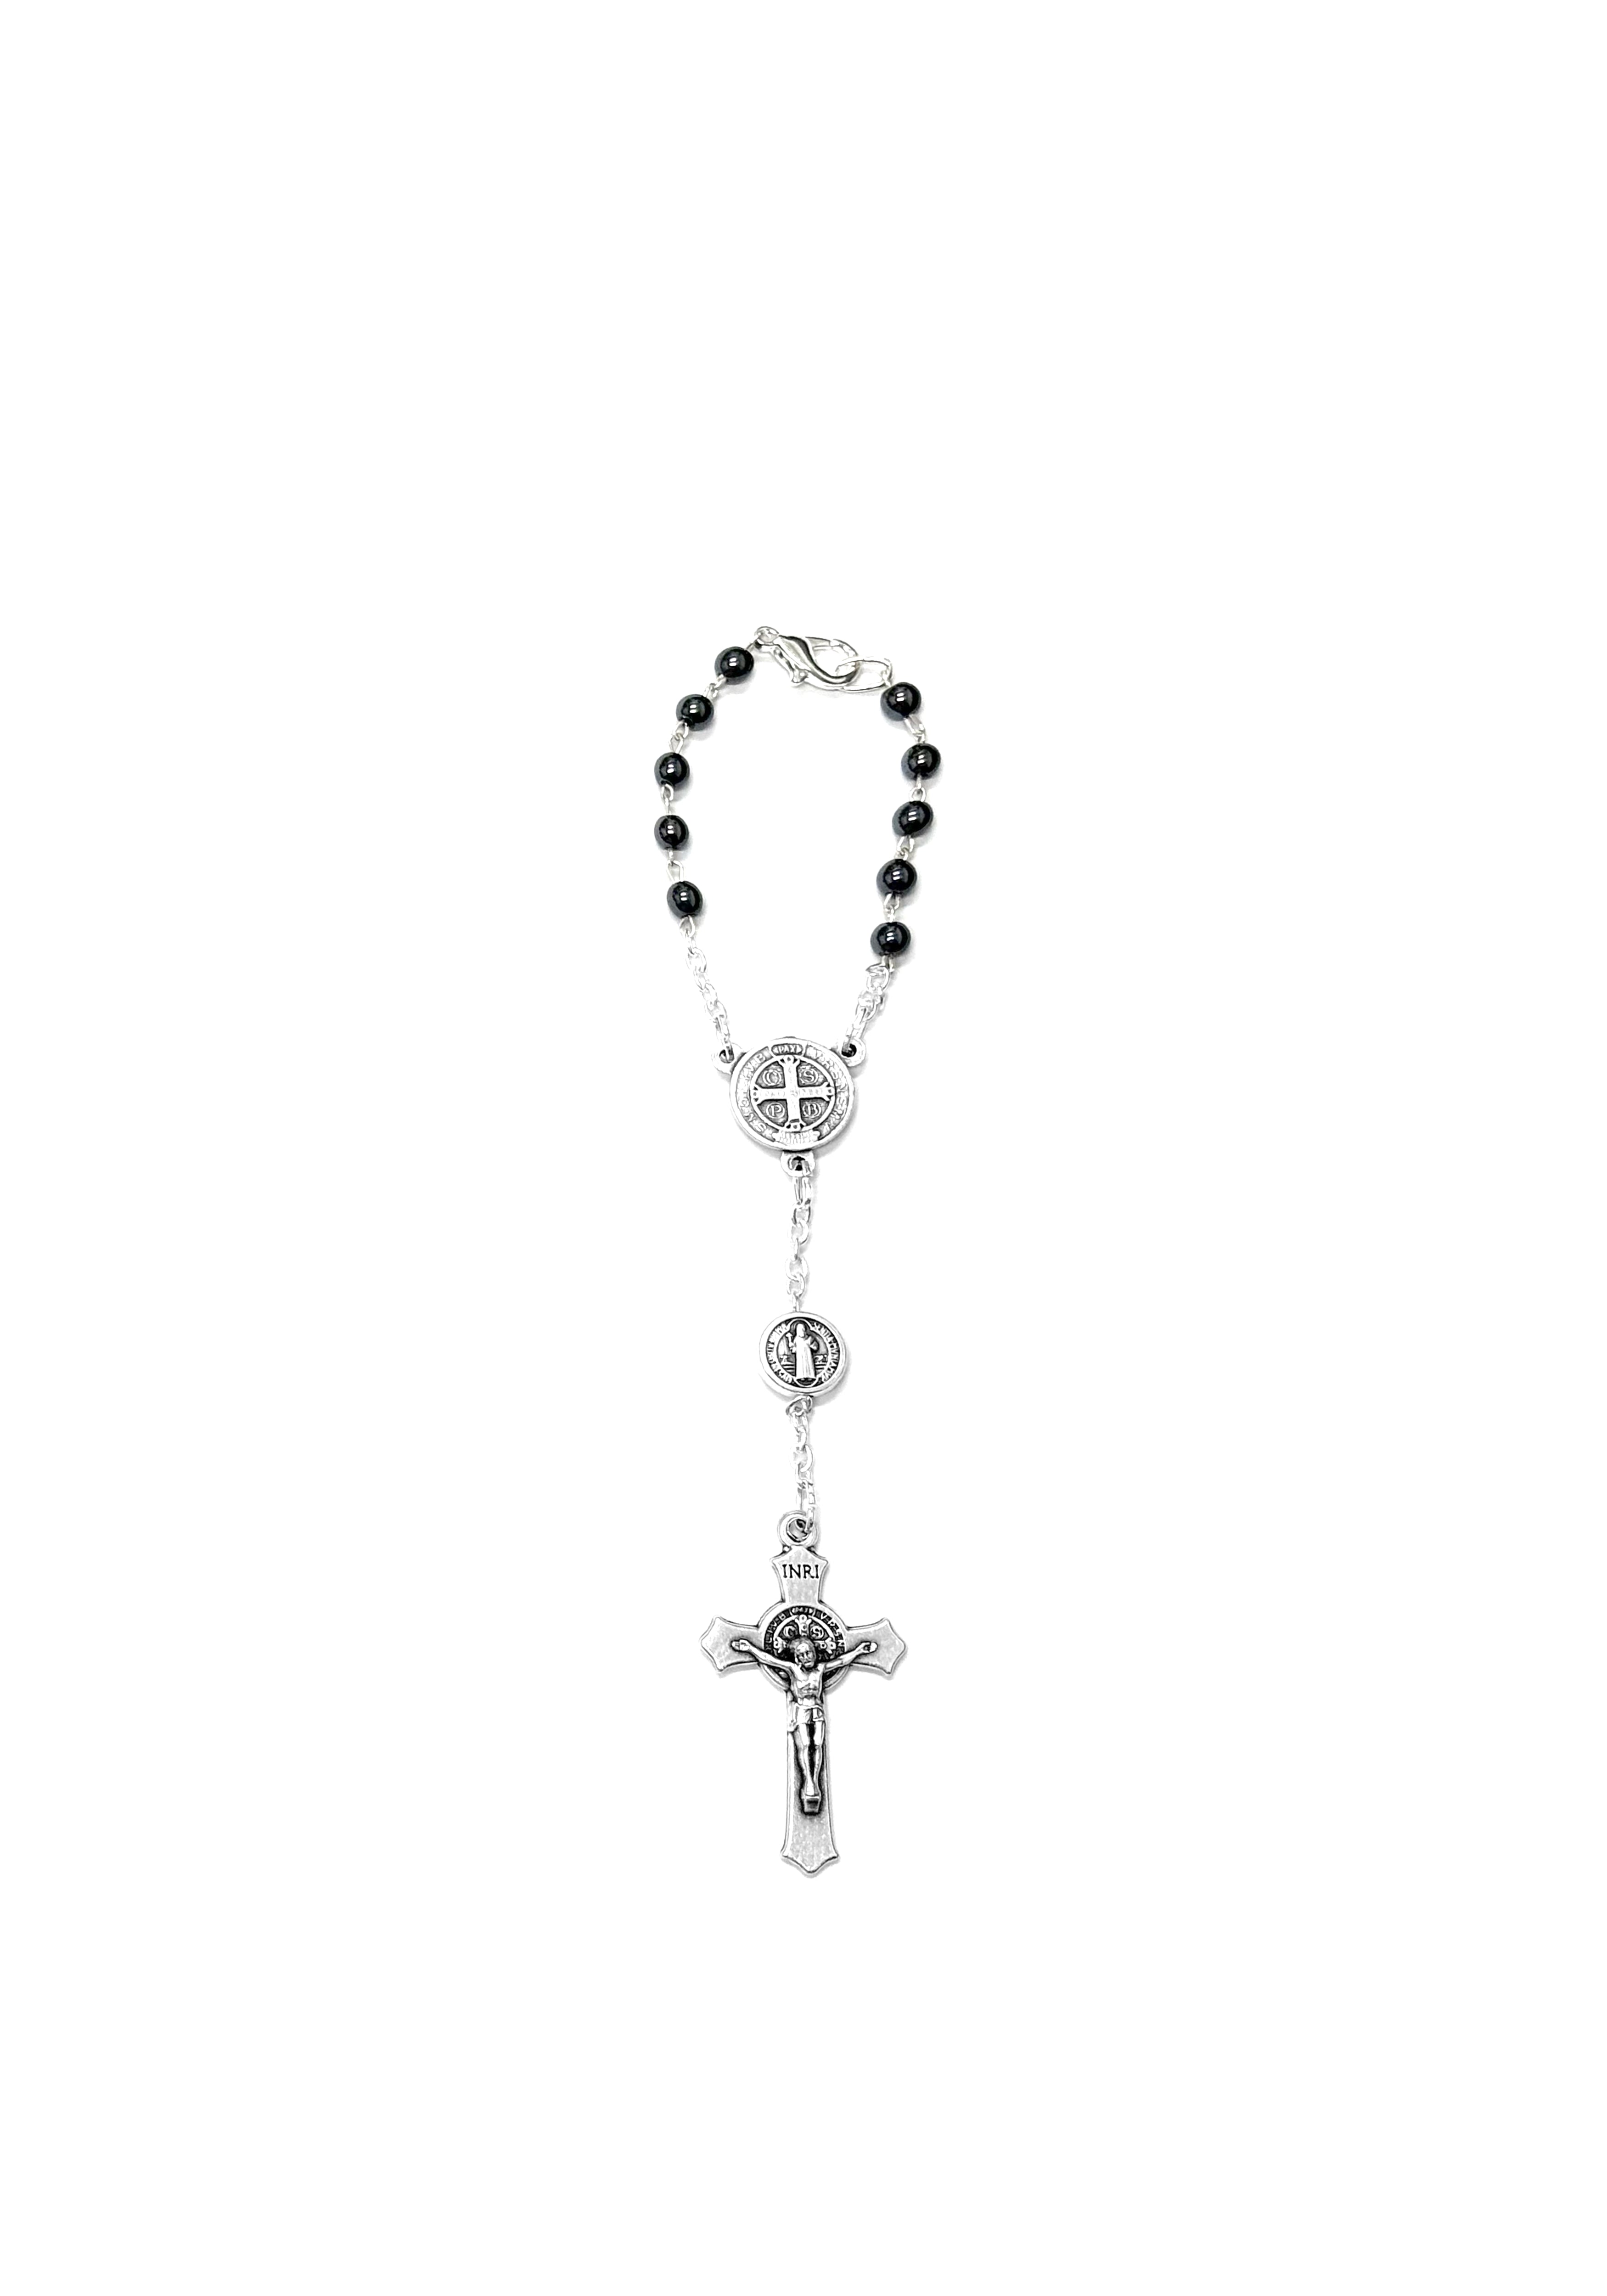 Hematite stone car rosary with medal and cross of Saint Benedict